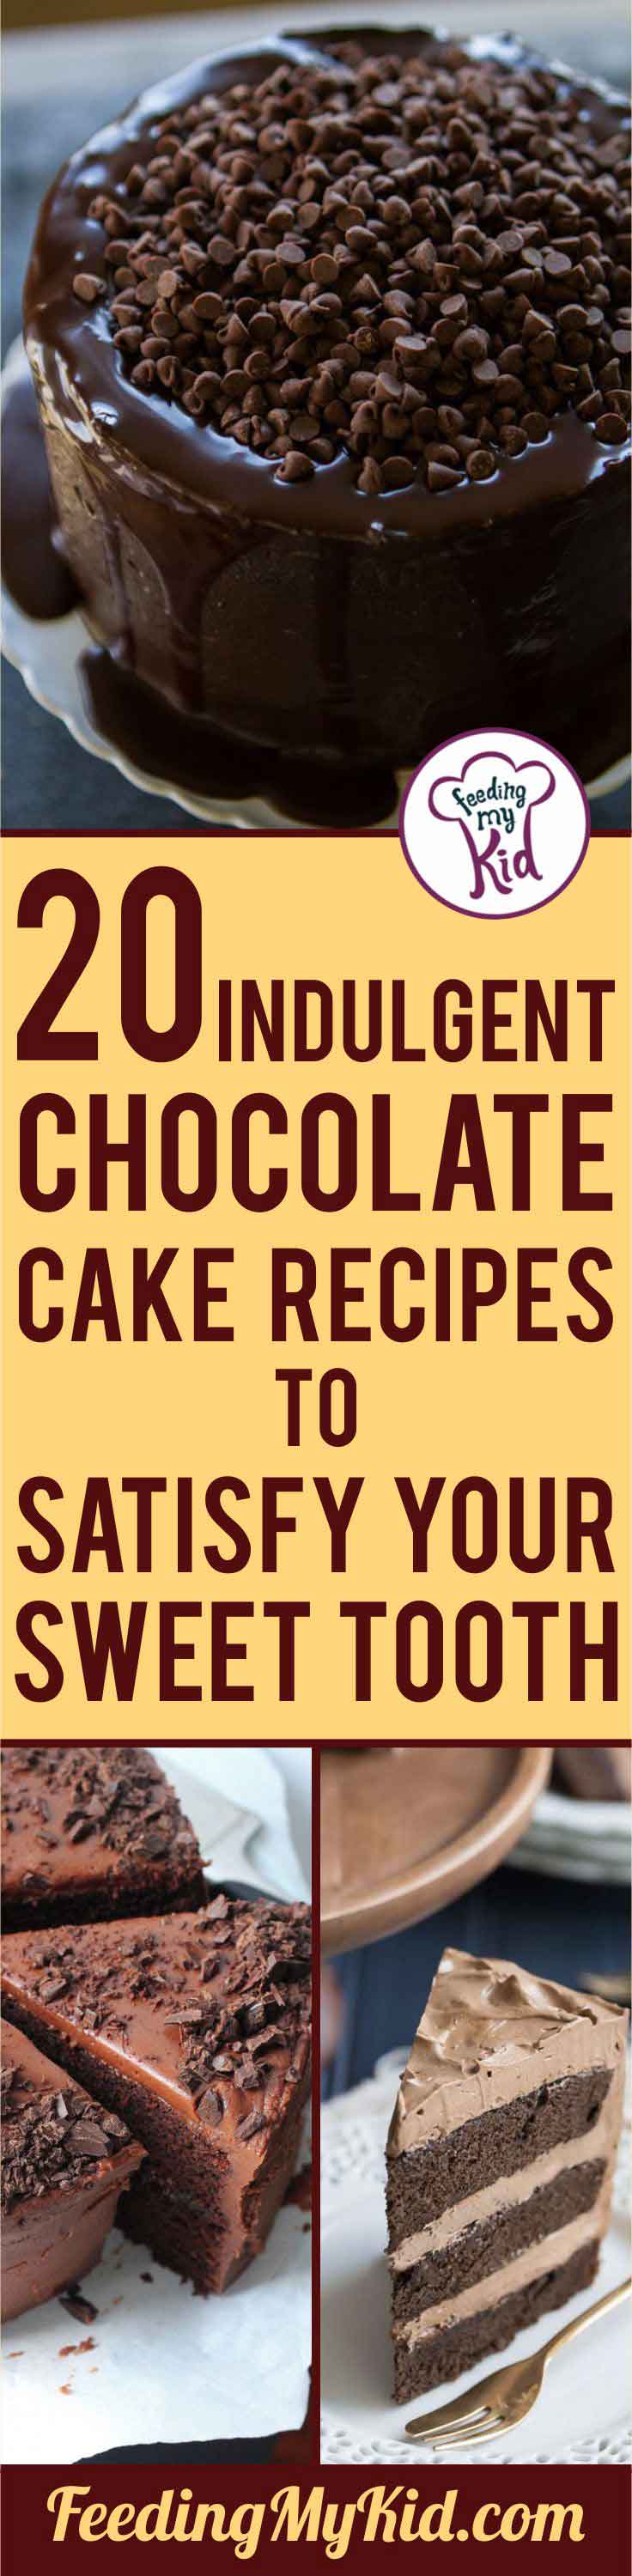 These chocolate cake recipes will satisfy that sweet craving! If you're a chocolate lover, you have to try one of these recipes. Yum!